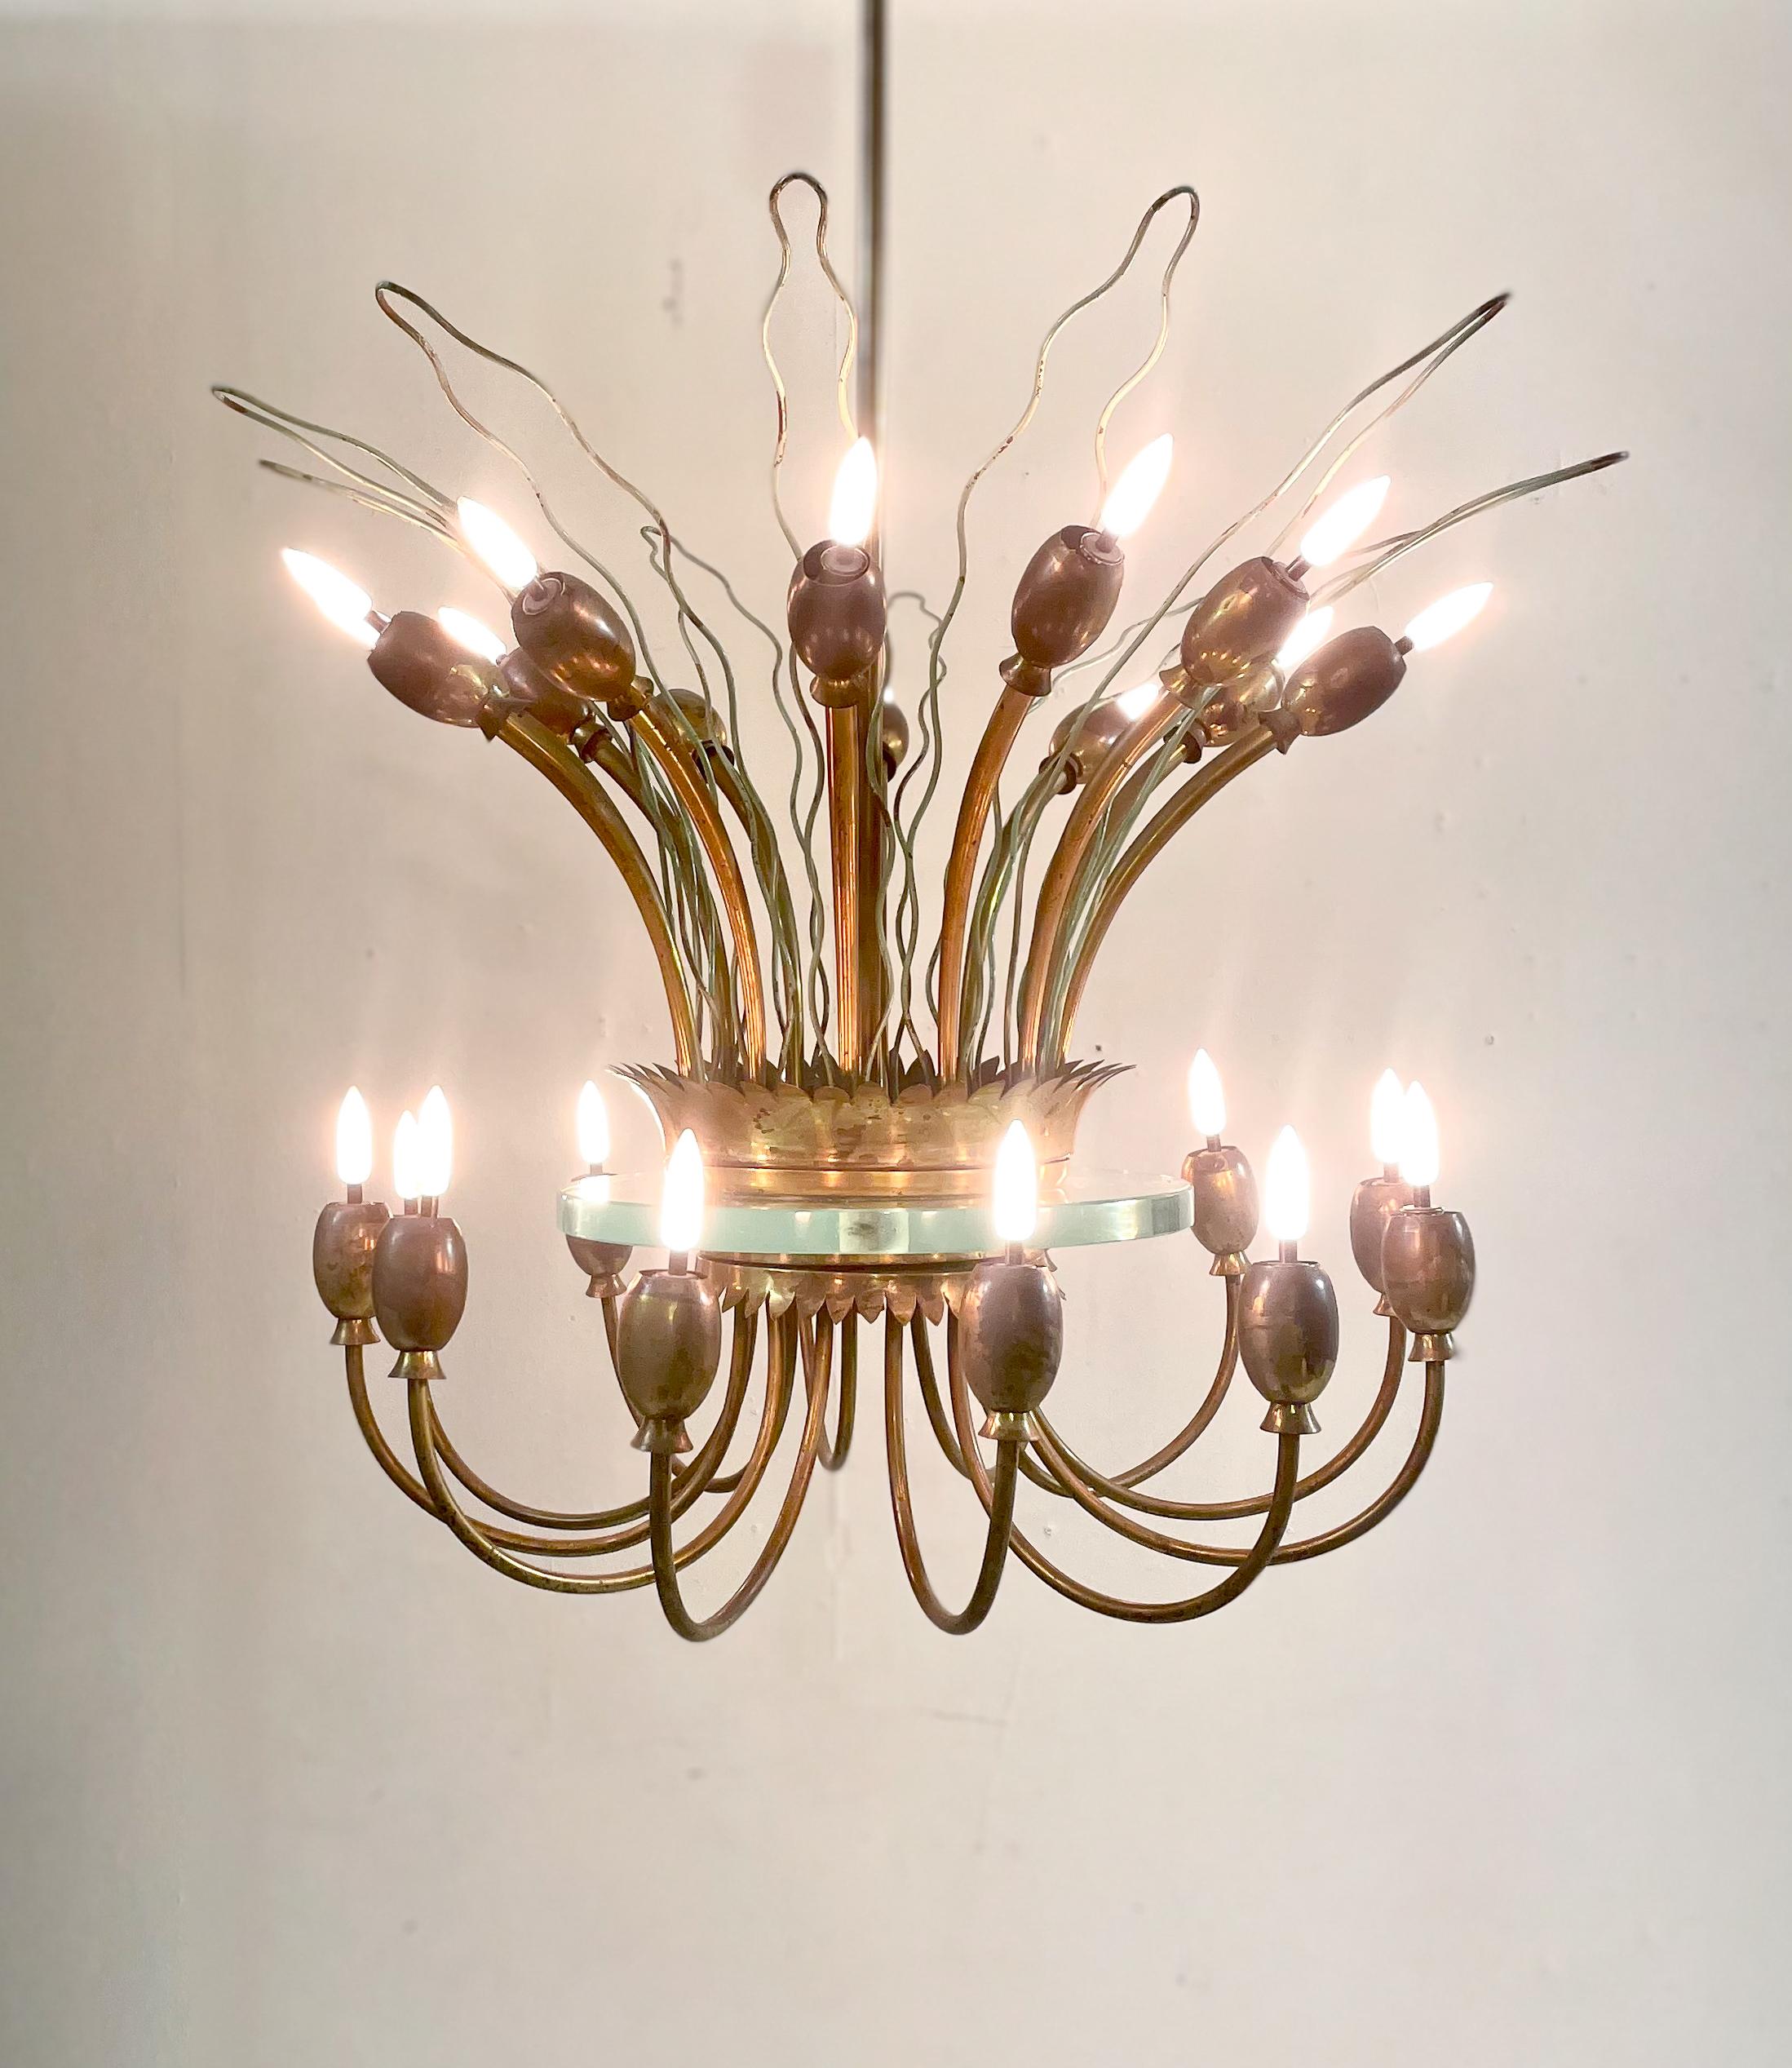 Mid-Century Modern Italian Chandelier, Metal Brass and Glass, Italy, 1950s For Sale 1